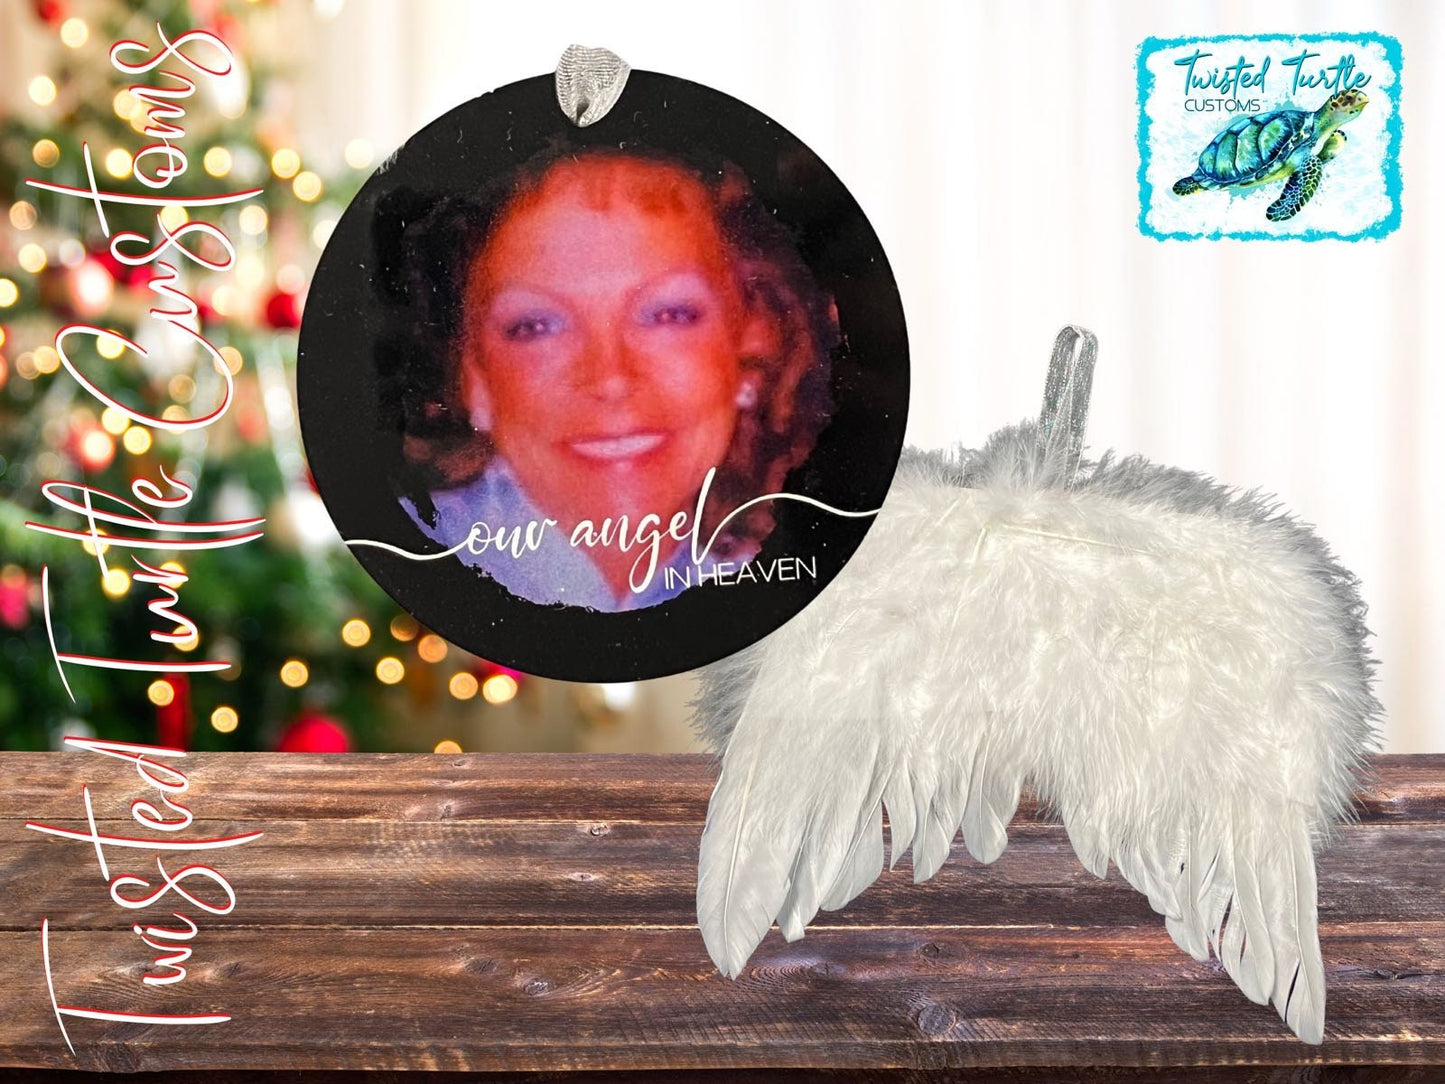 Our Angel in Heaven Customized Photo Memorial Feather Wings Christmas Ornament